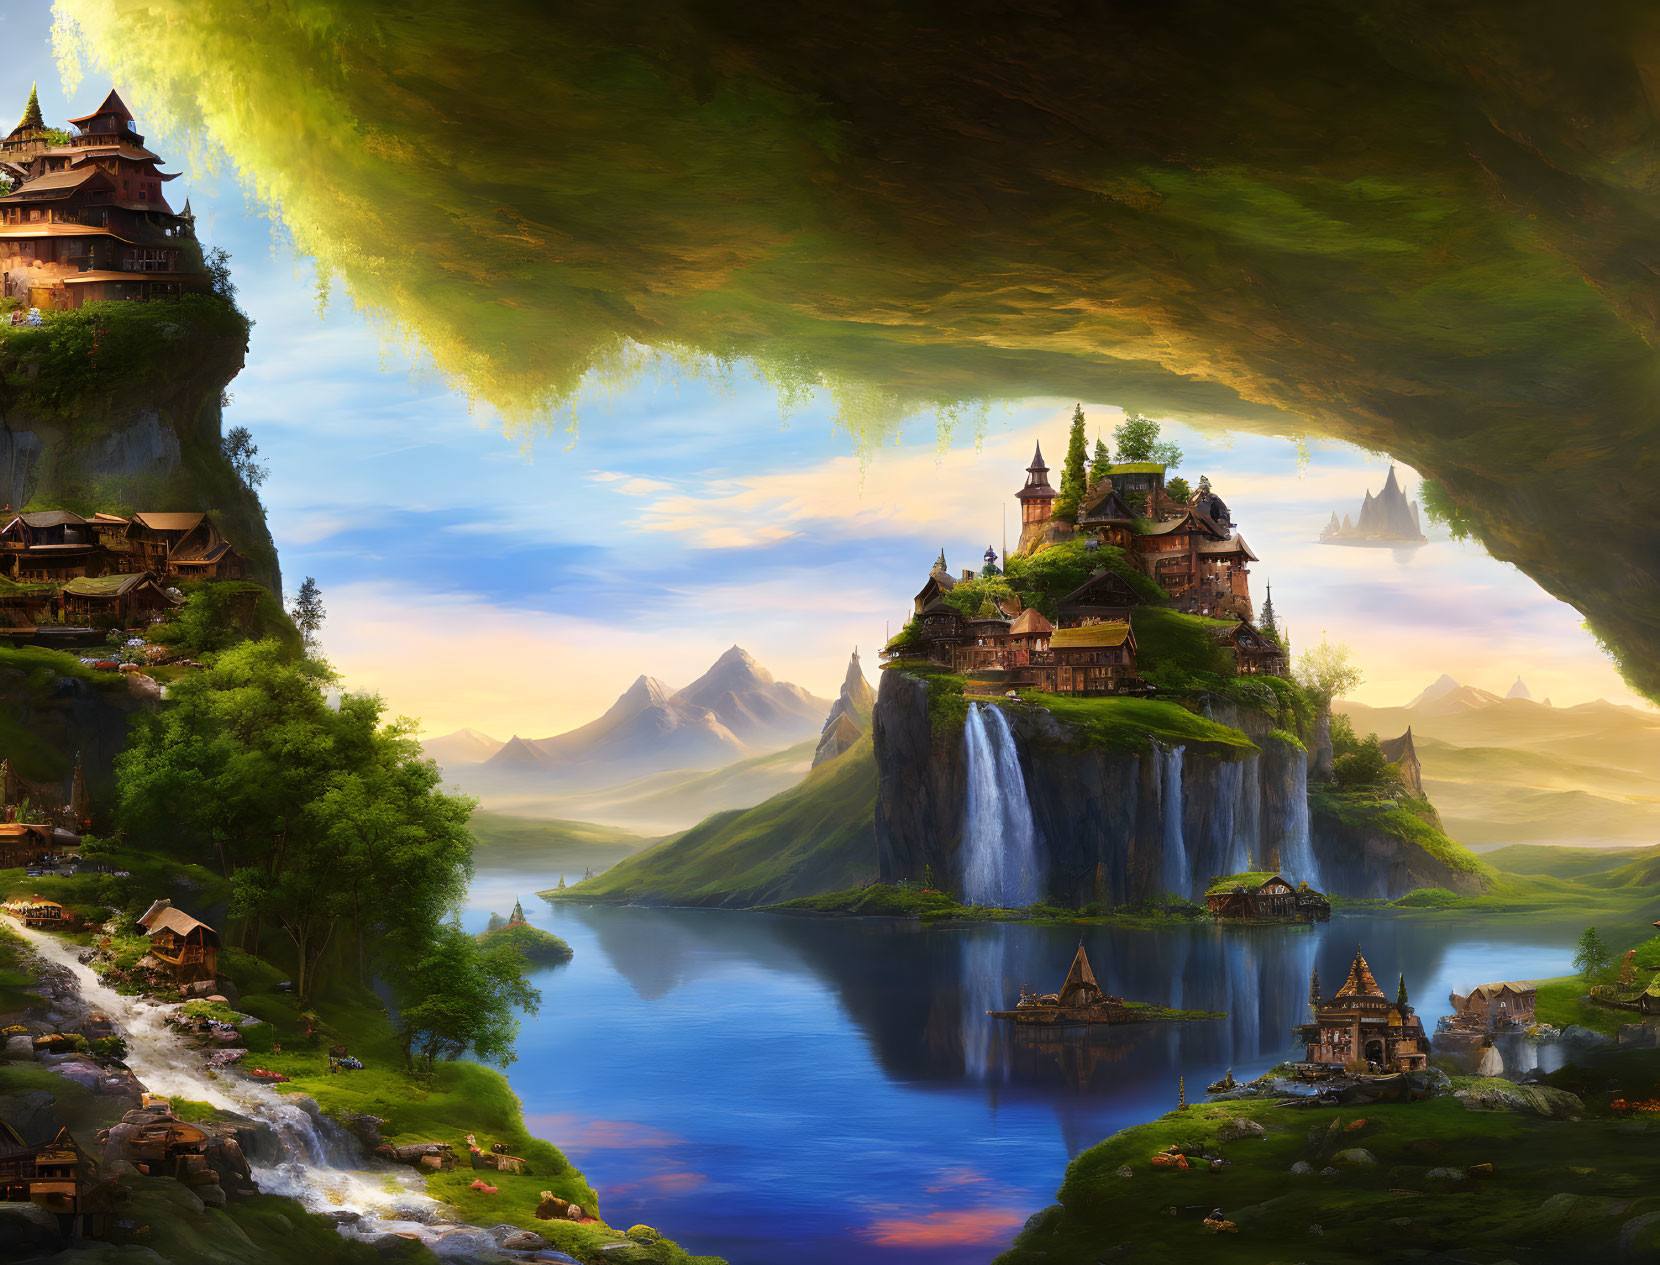 Fantastical floating island with lush green underside, waterfalls, lakes, mountains, and cliffside